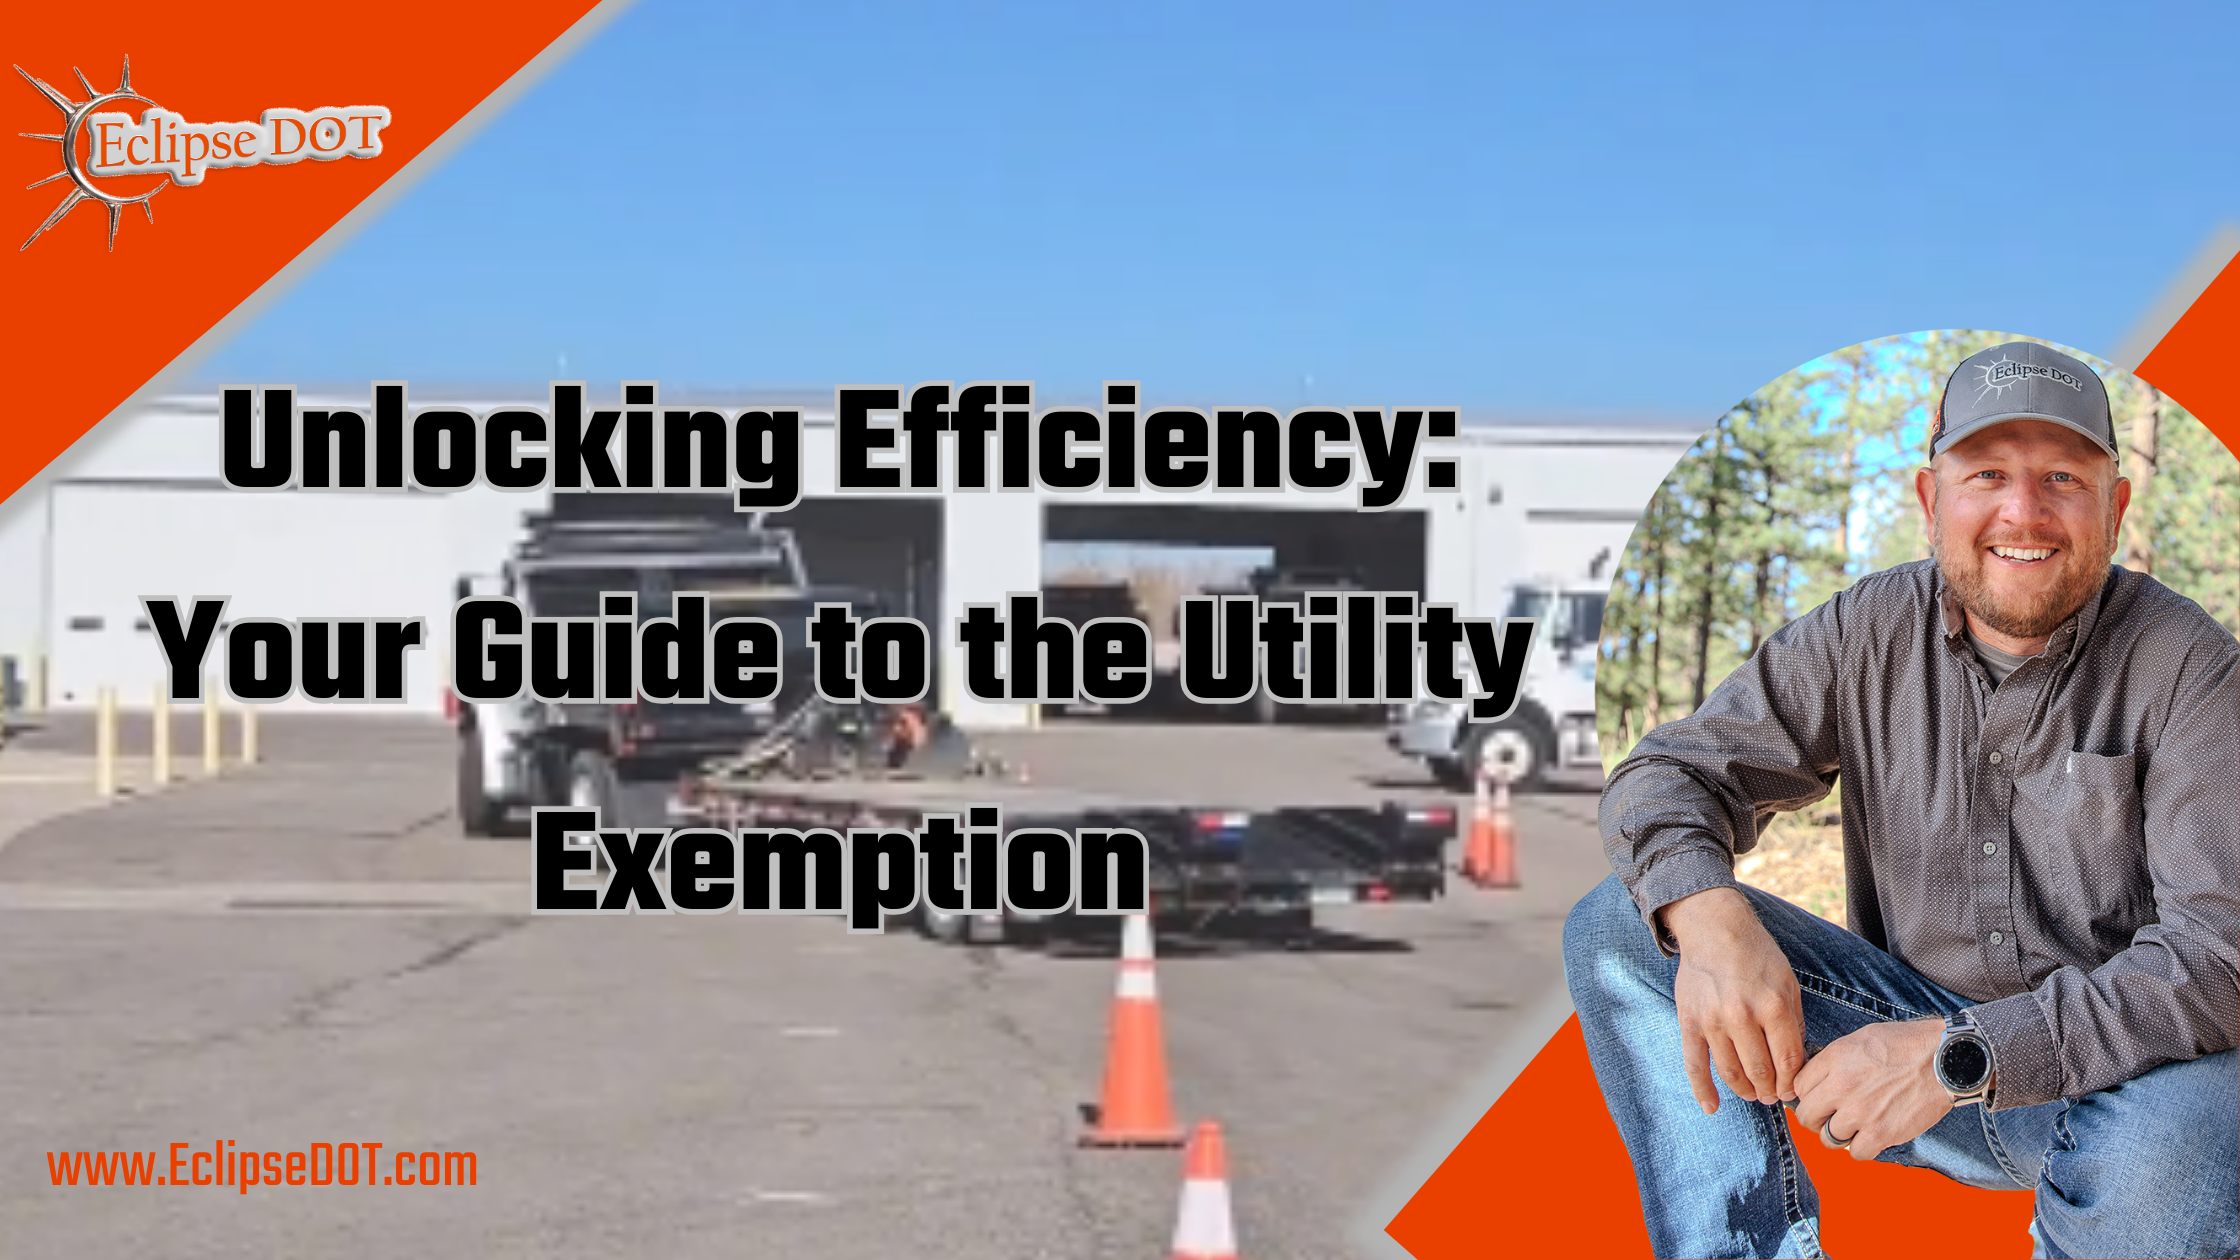 Unlocking Efficiency: Your Guide to the Utility Exemption